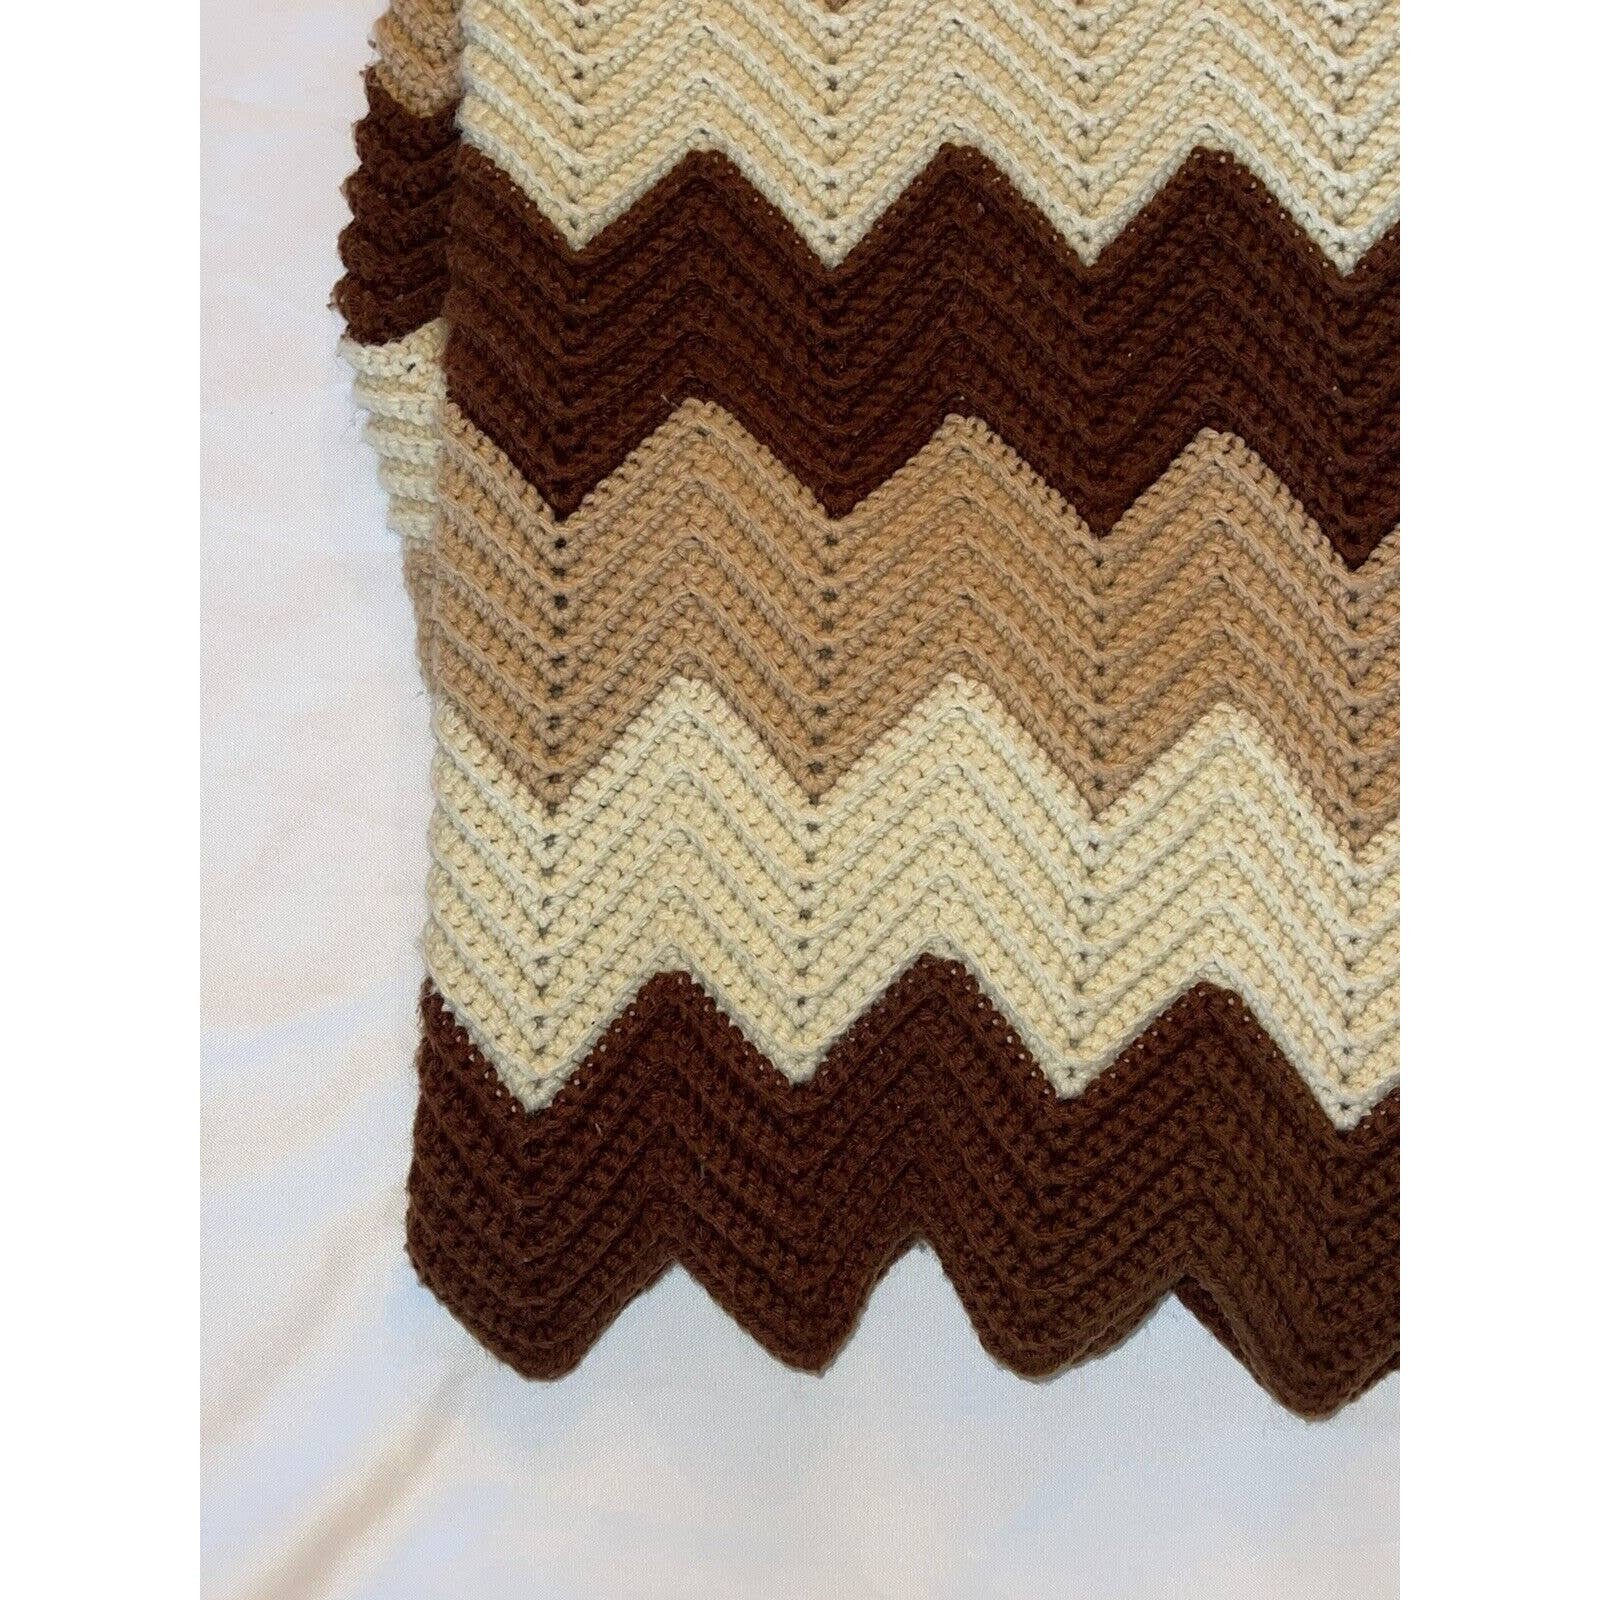 Vintage 1970s retro afghan, never used! Off white, Tan and browns 73”x 44” eS8vdk8tY